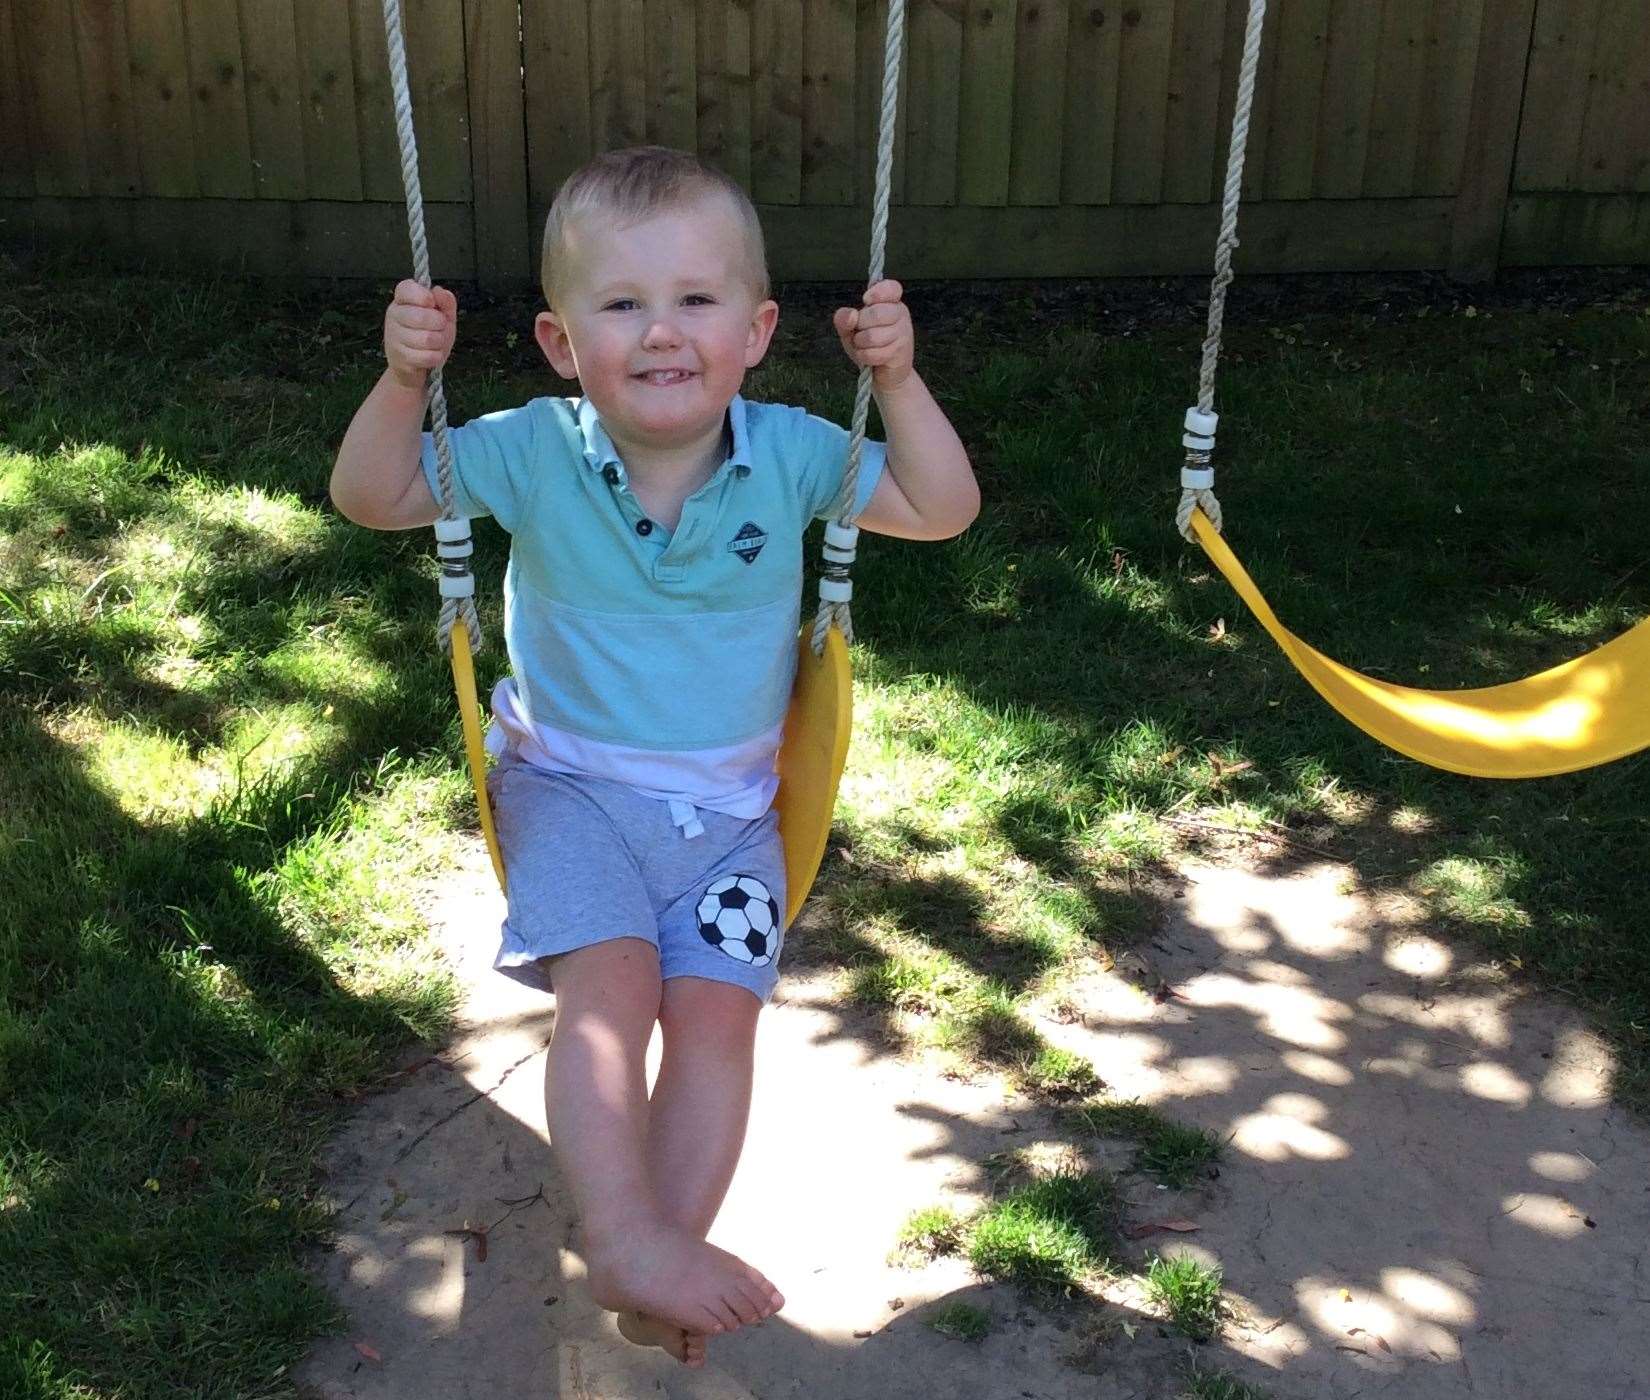 Caroline May started the fundraising appeal to thank staff who saved the life of her two-year-old son Arthur